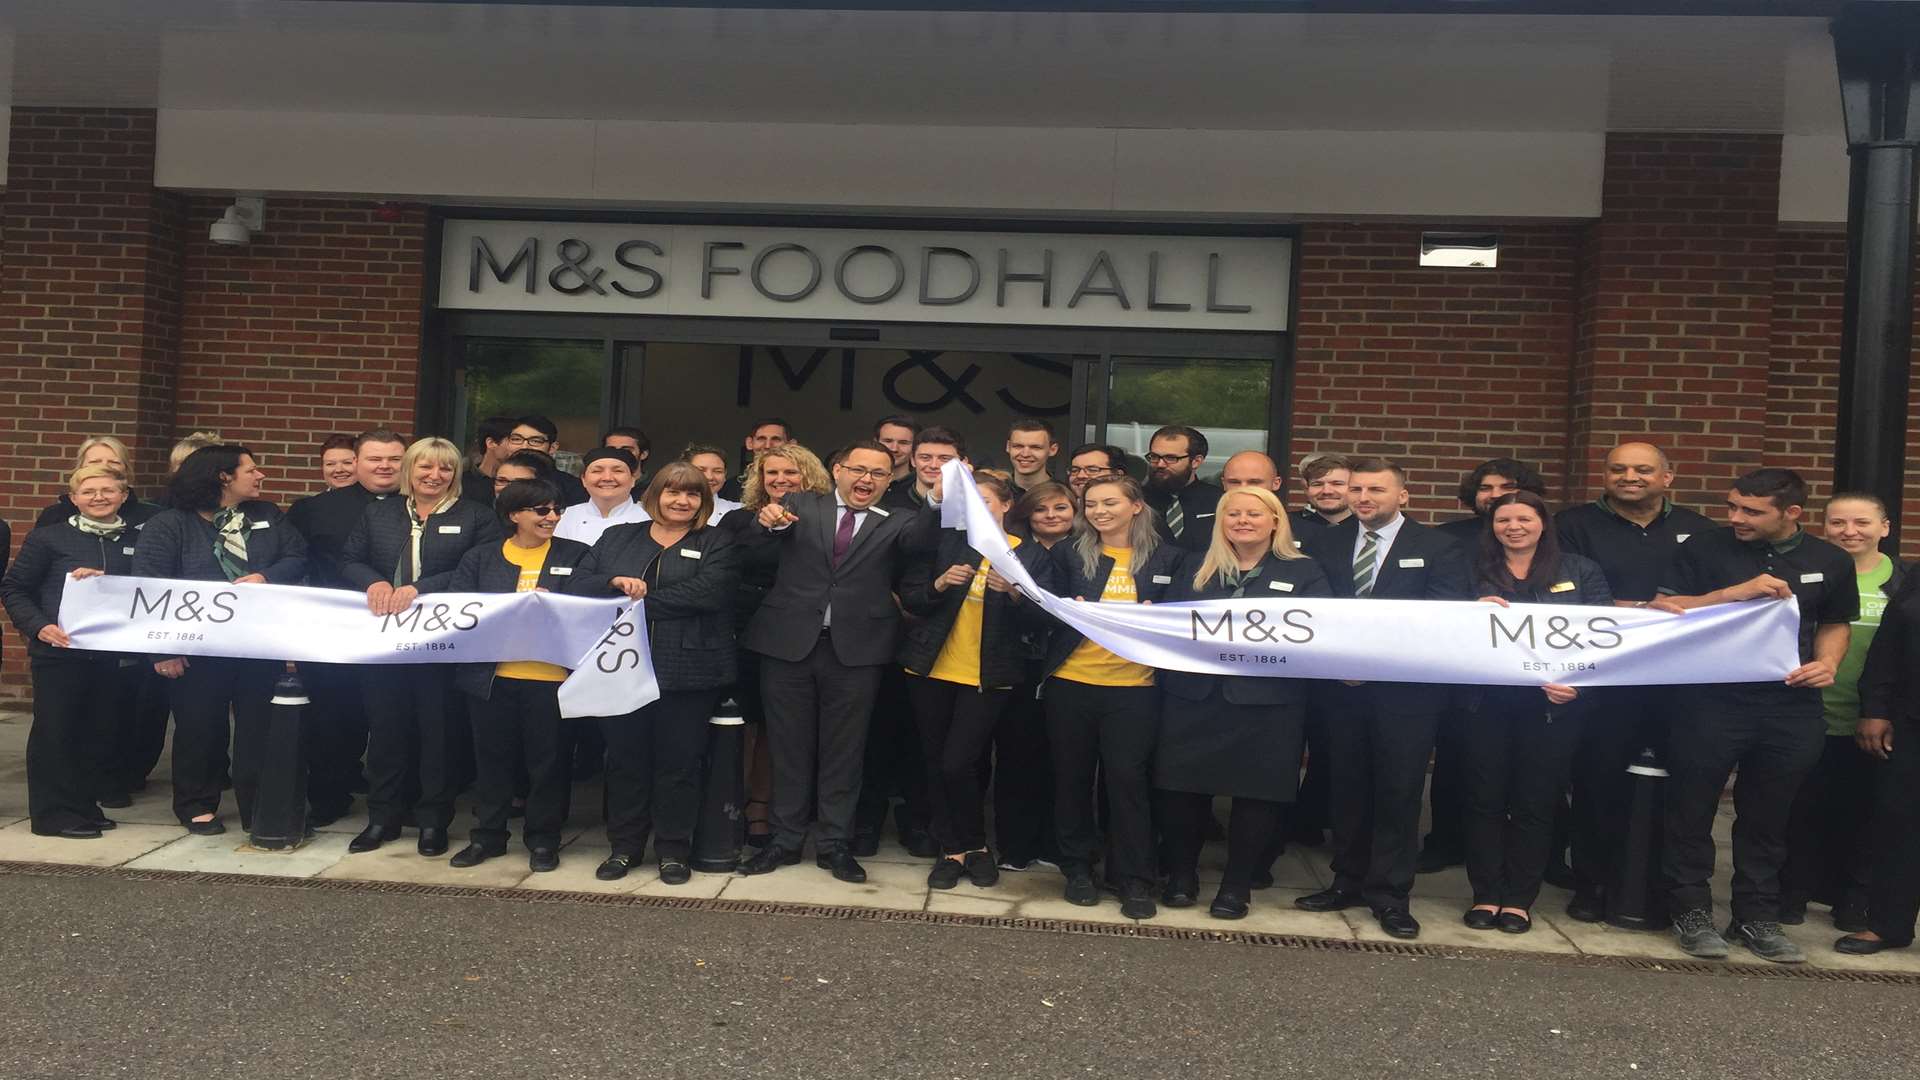 Staff cutting the ribbon at the store opening